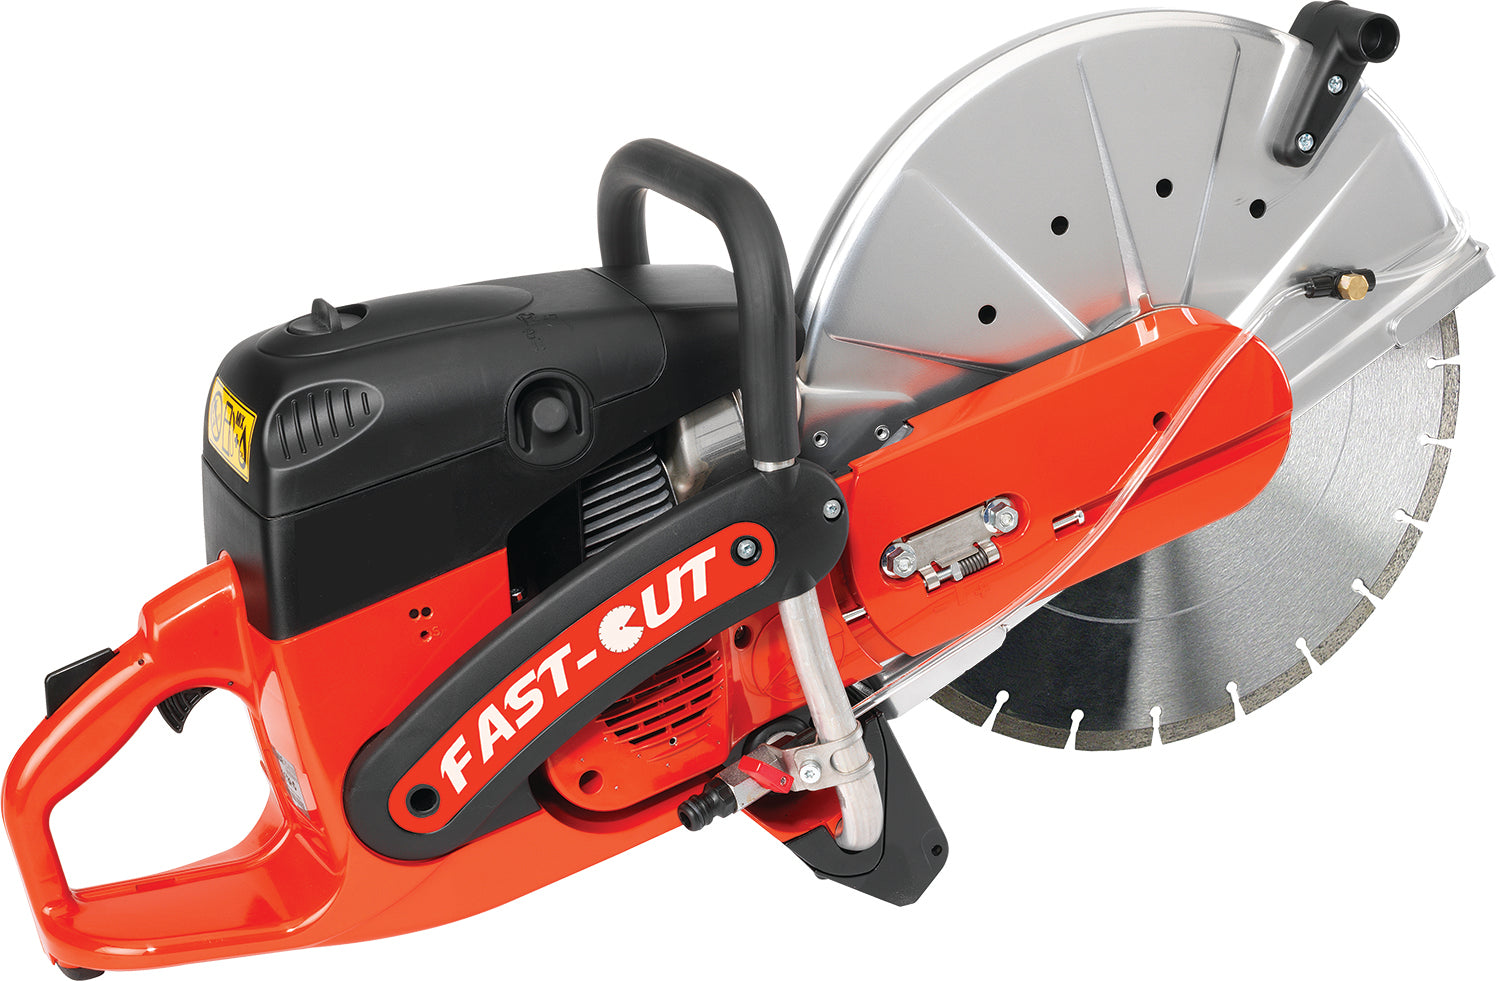 FC8116, Fast-Cut SLR High Speed Hand Held Saw with 16" Blade Guard